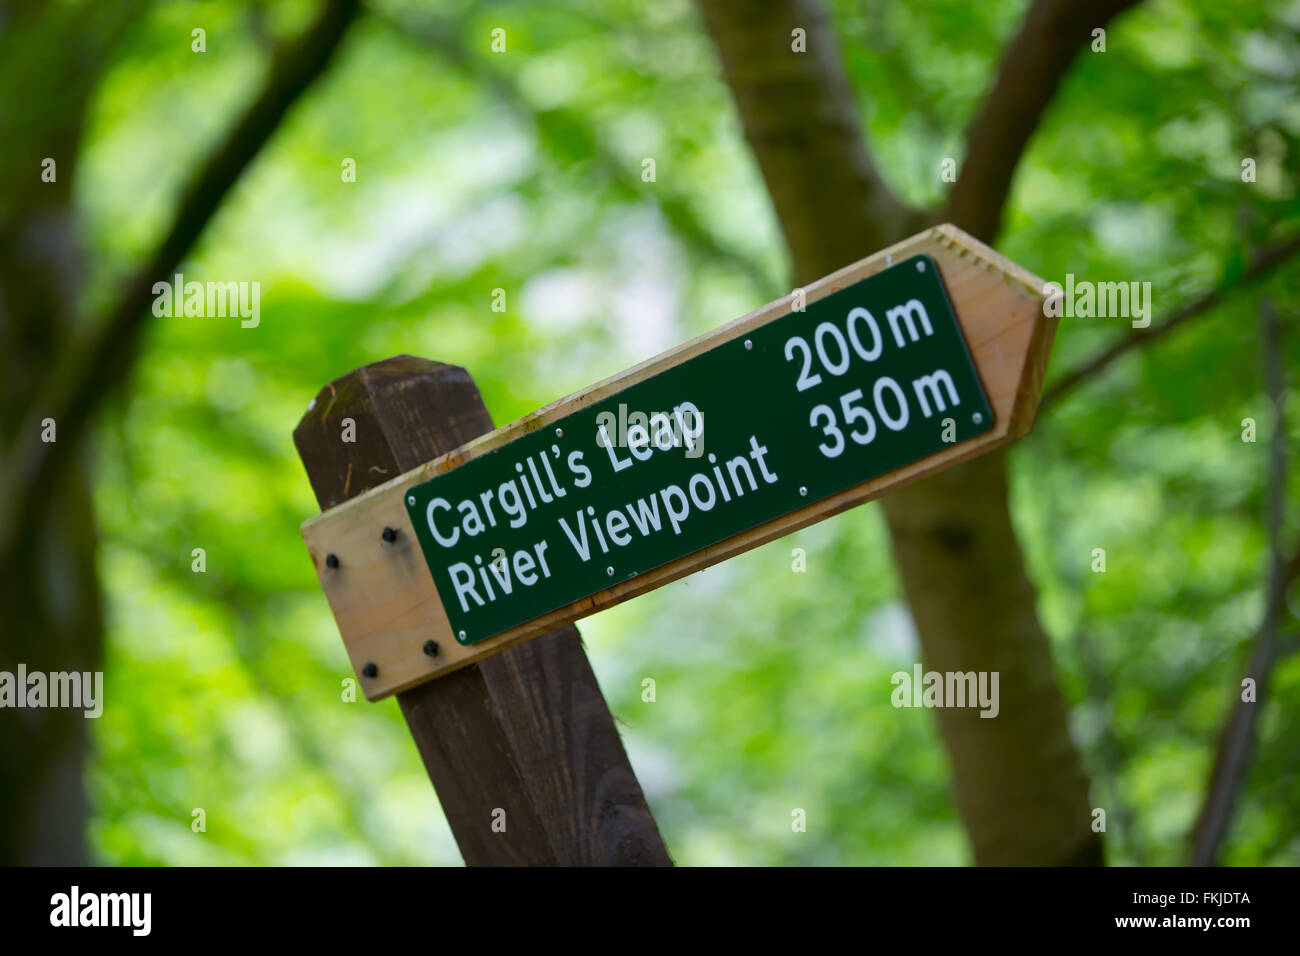 Sign for Cargills Leap and River Viewpoint in the town of Blairgowrie, Perthshire, Scotland, UK Stock Photo